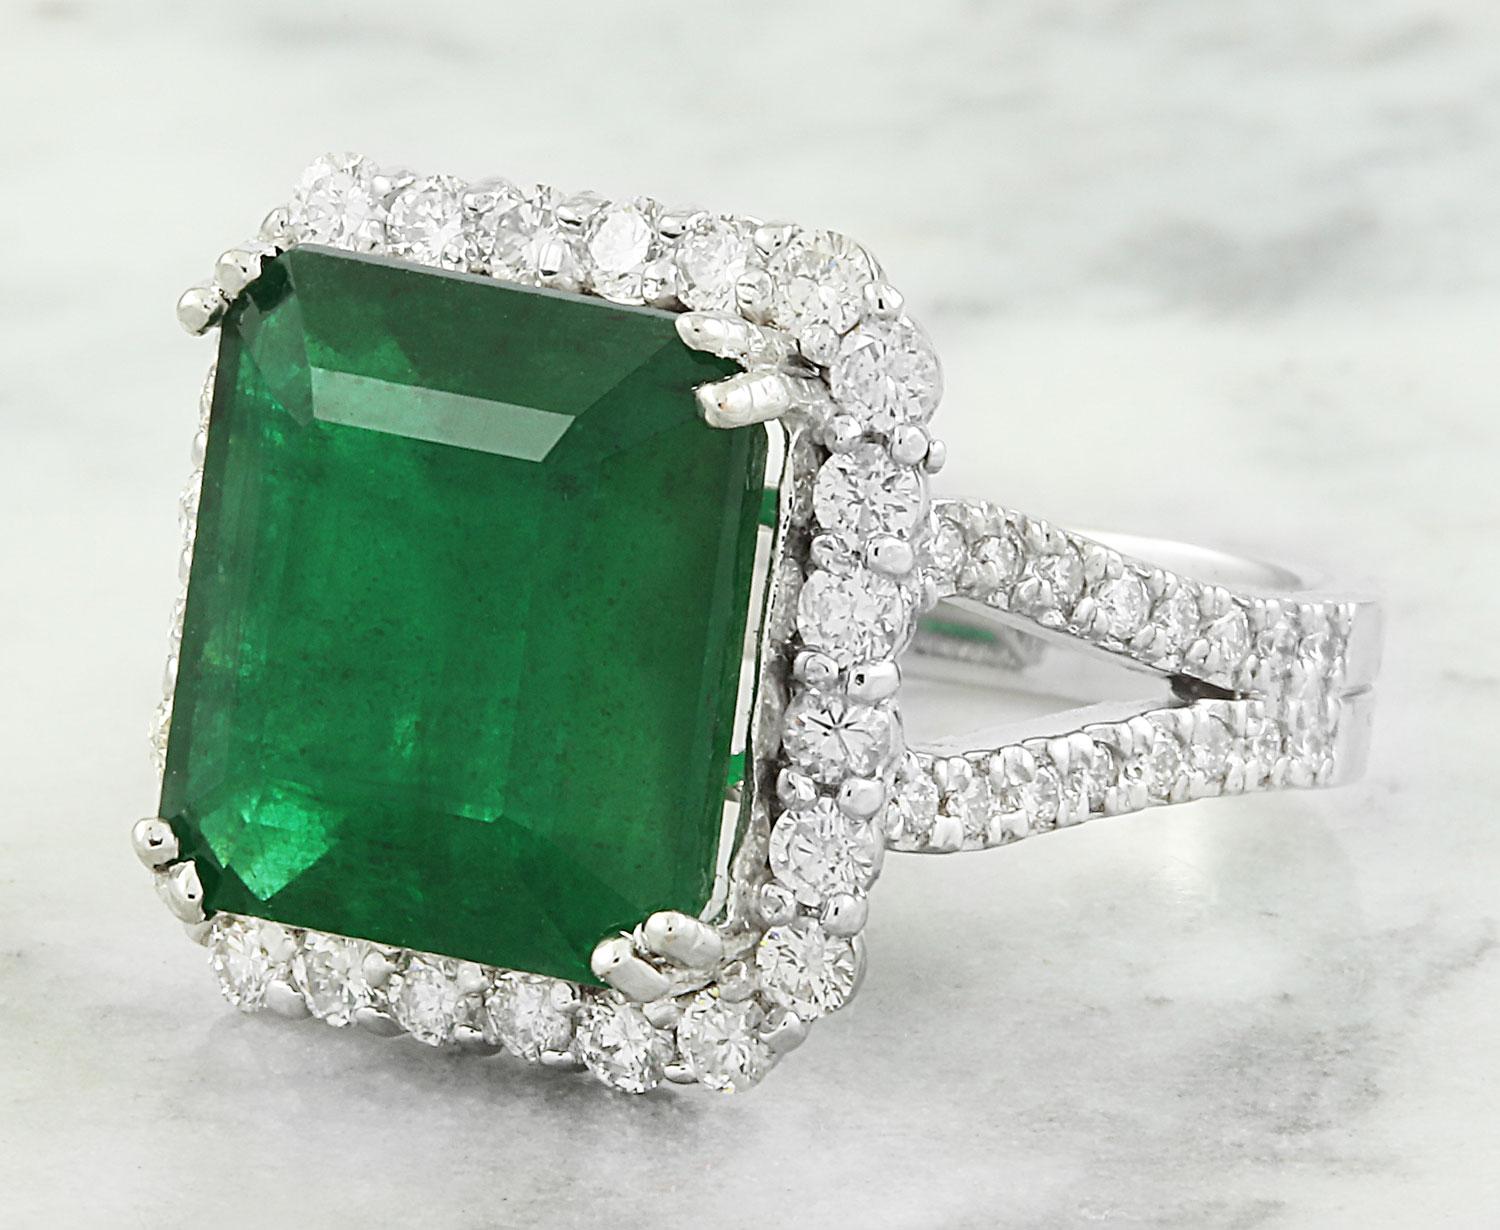 Introducing our exquisite 11.30 Carat Natural Emerald Ring, crafted with precision in luxurious 14K Solid White Gold. Stamped for authenticity, this ring boasts a total weight of 10.8 grams, ensuring durability and quality. The centerpiece is a